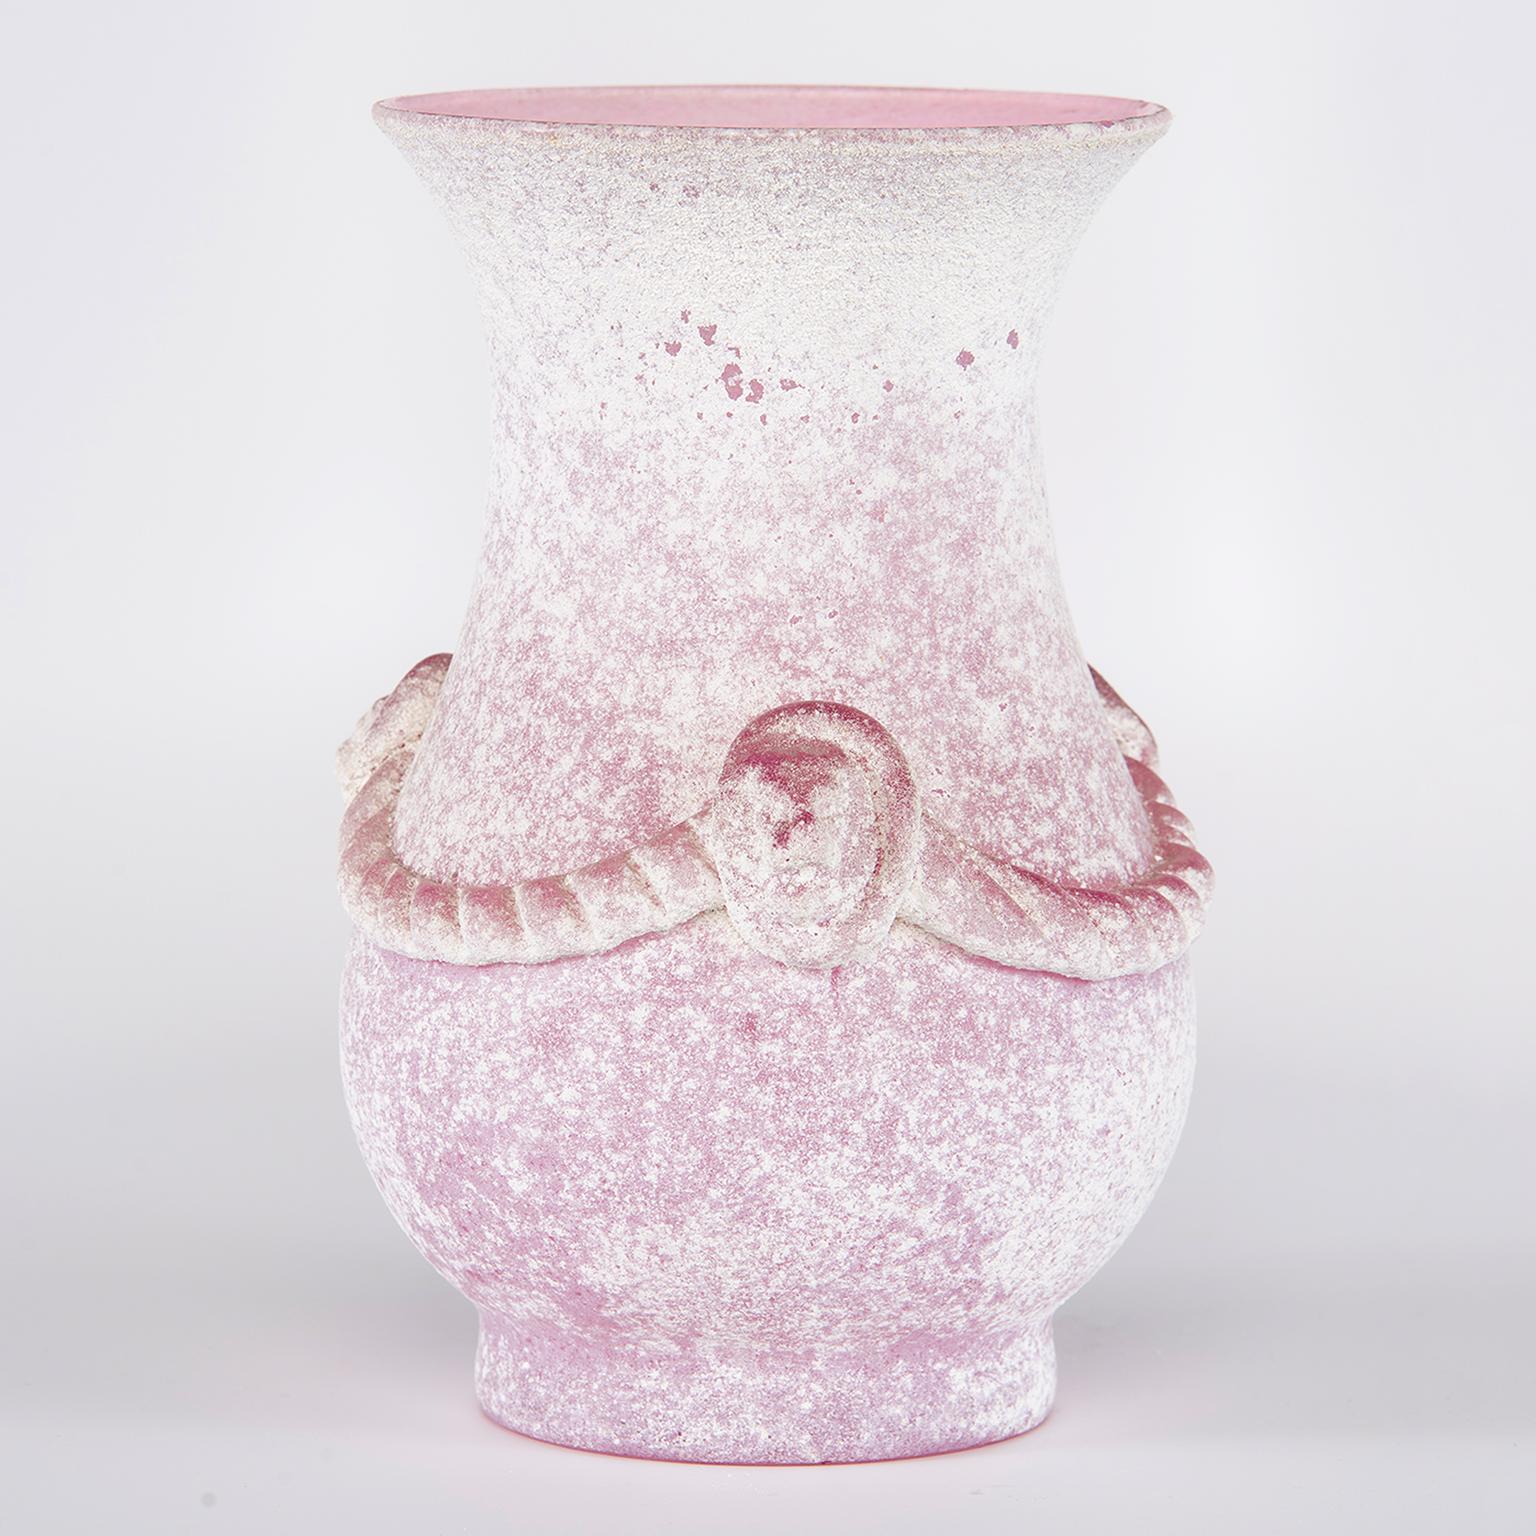 Seguso pink Scavo style Murano glass vase in Classic shape with applied glass design of rope garland and lion heads, circa 1960s. Excellent vintage condition with no flaws found.